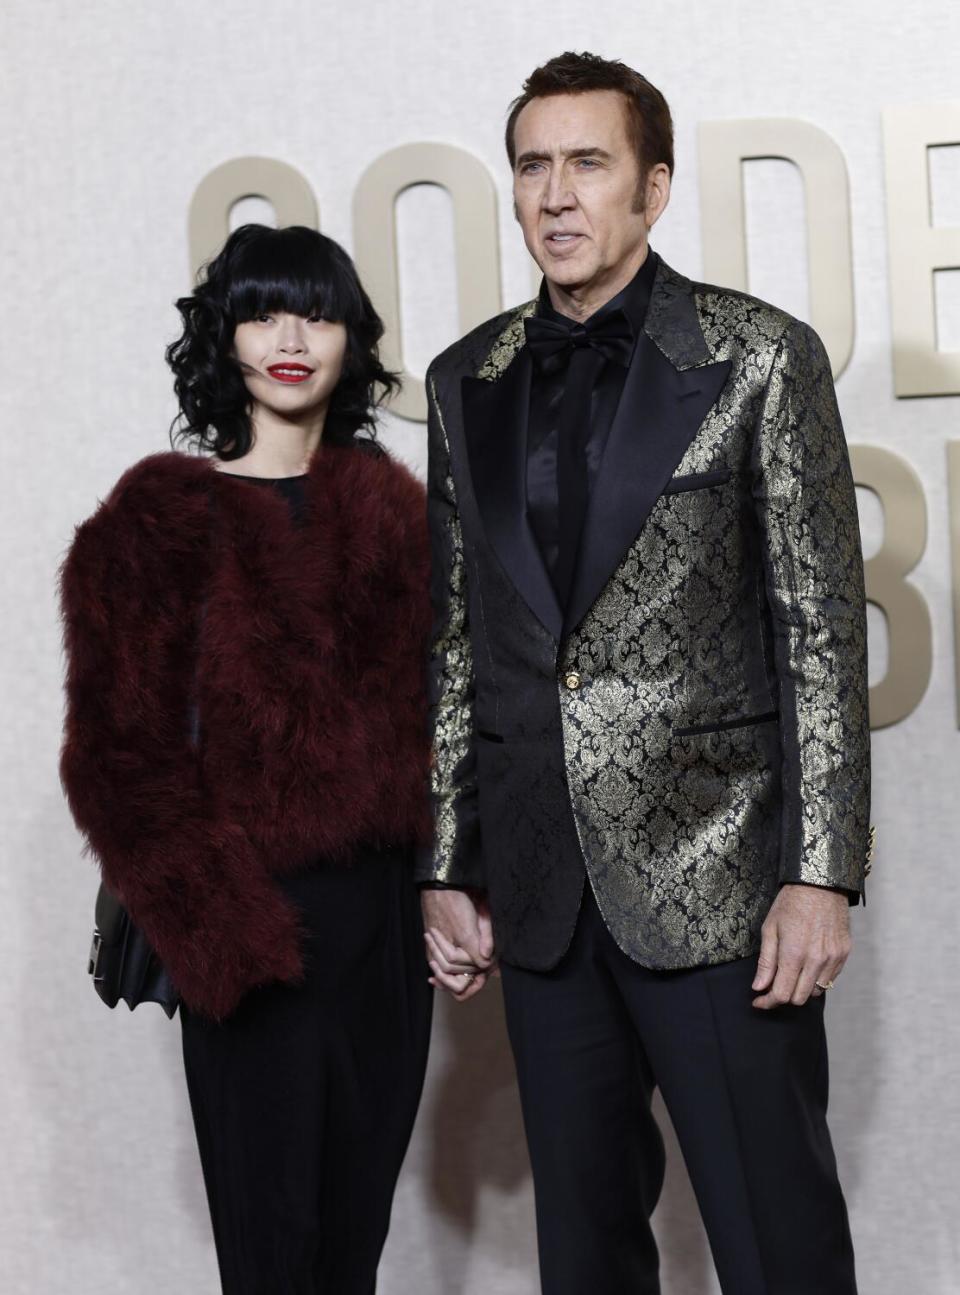 Riko Shibata and Nicolas Cage on the red carpet of the 81st Annual Golden Globe Awards